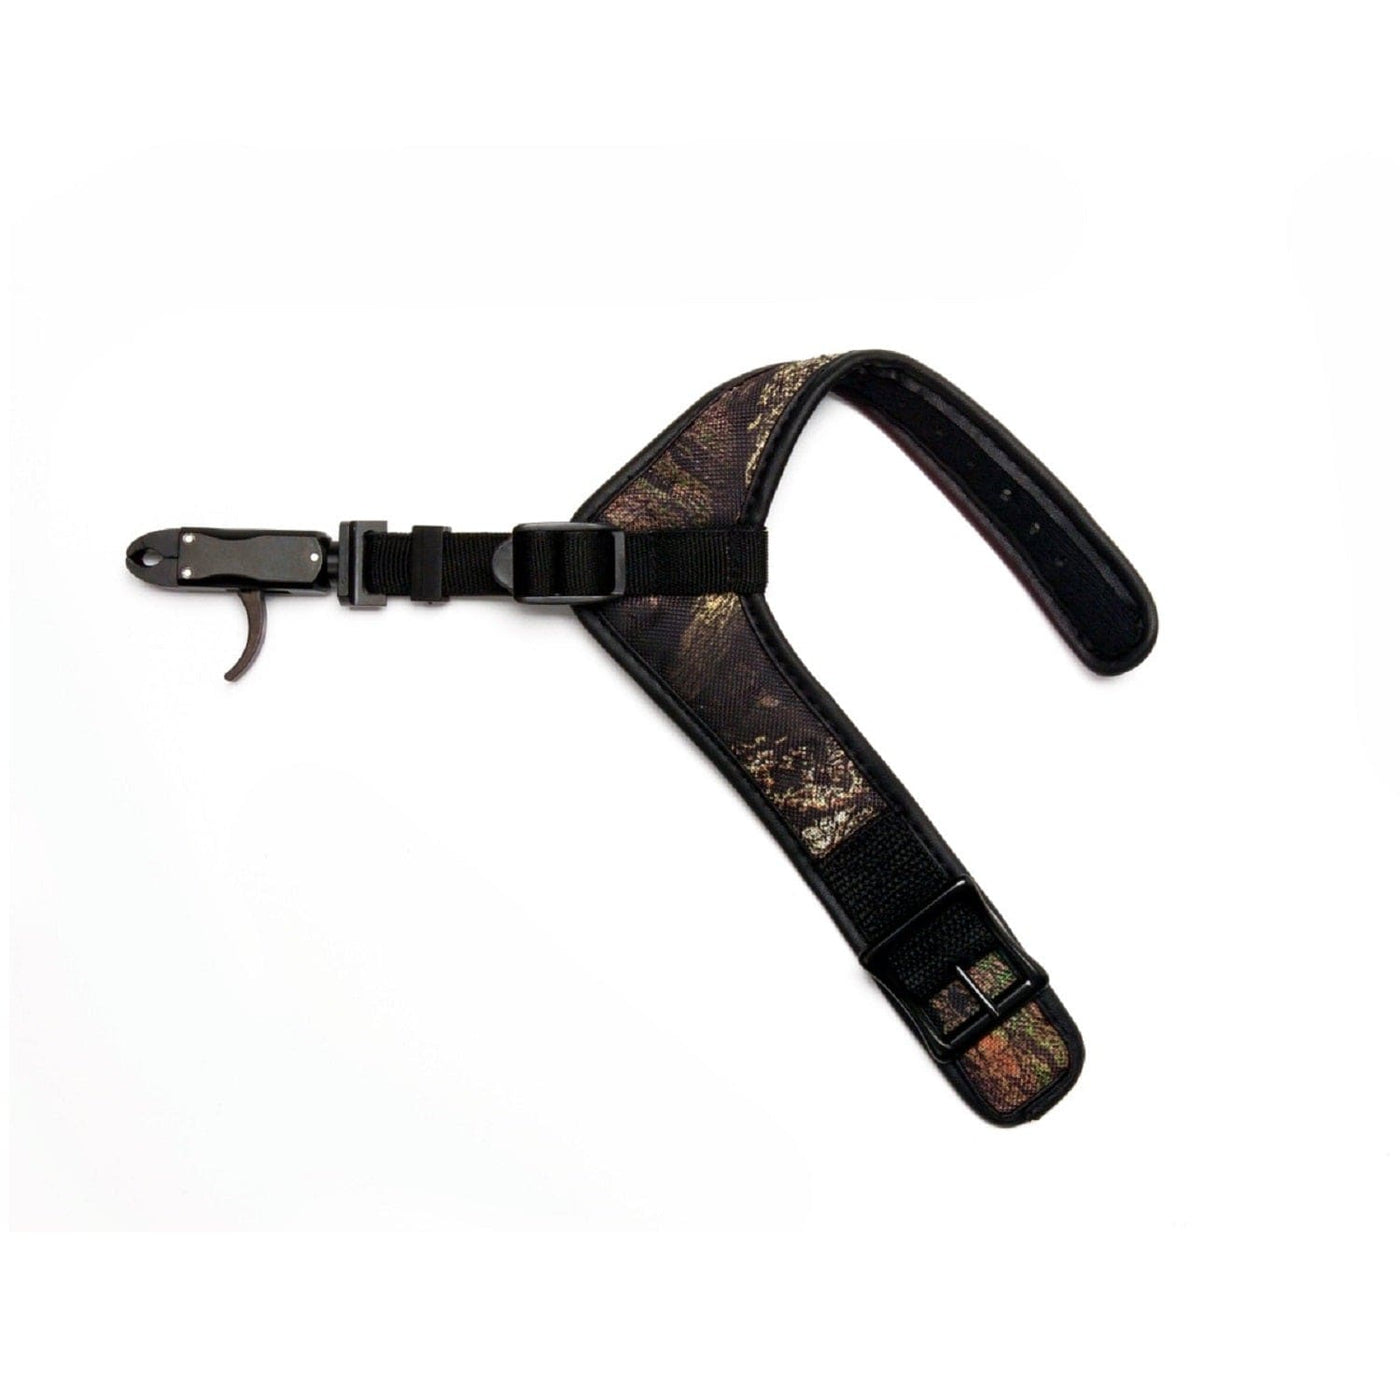 .30-06 Outdoors .30-06 Mustang Compact Camo Release Web Stem Archery